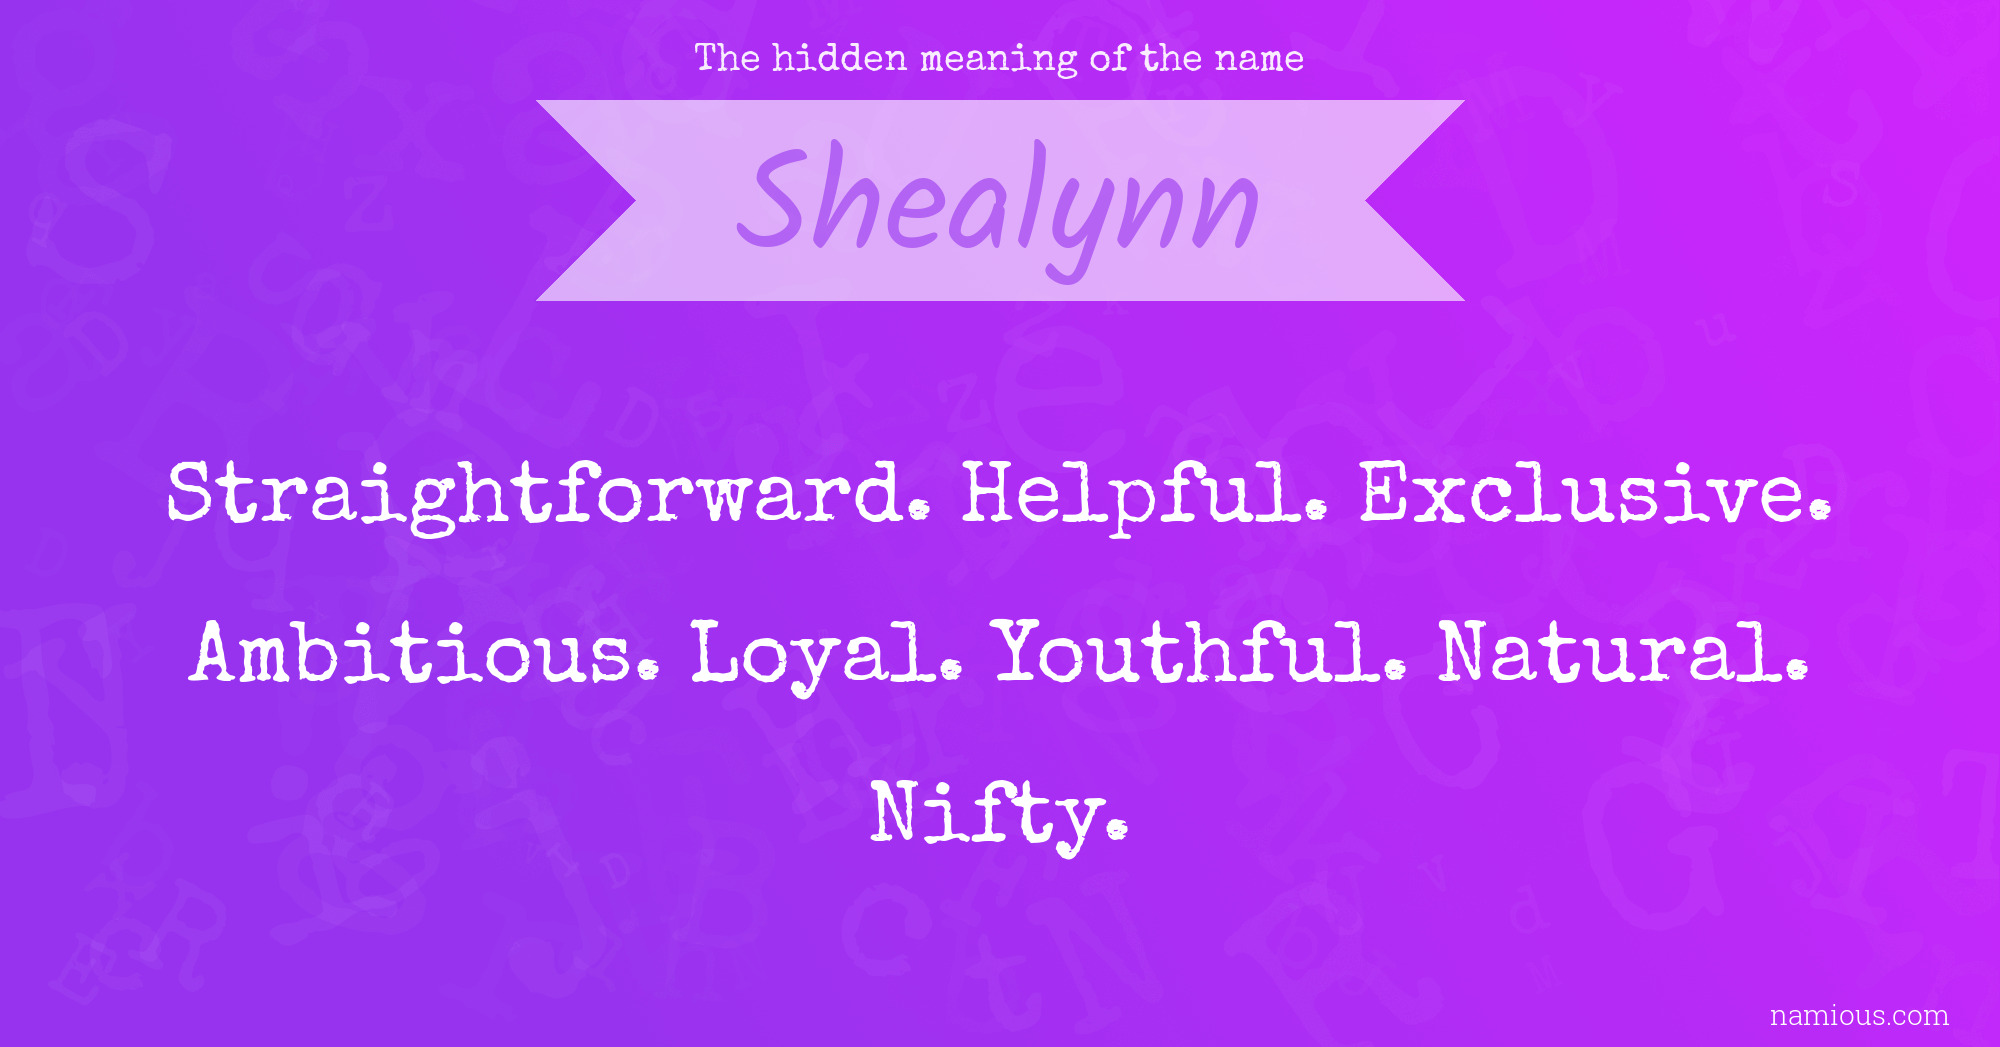 The hidden meaning of the name Shealynn